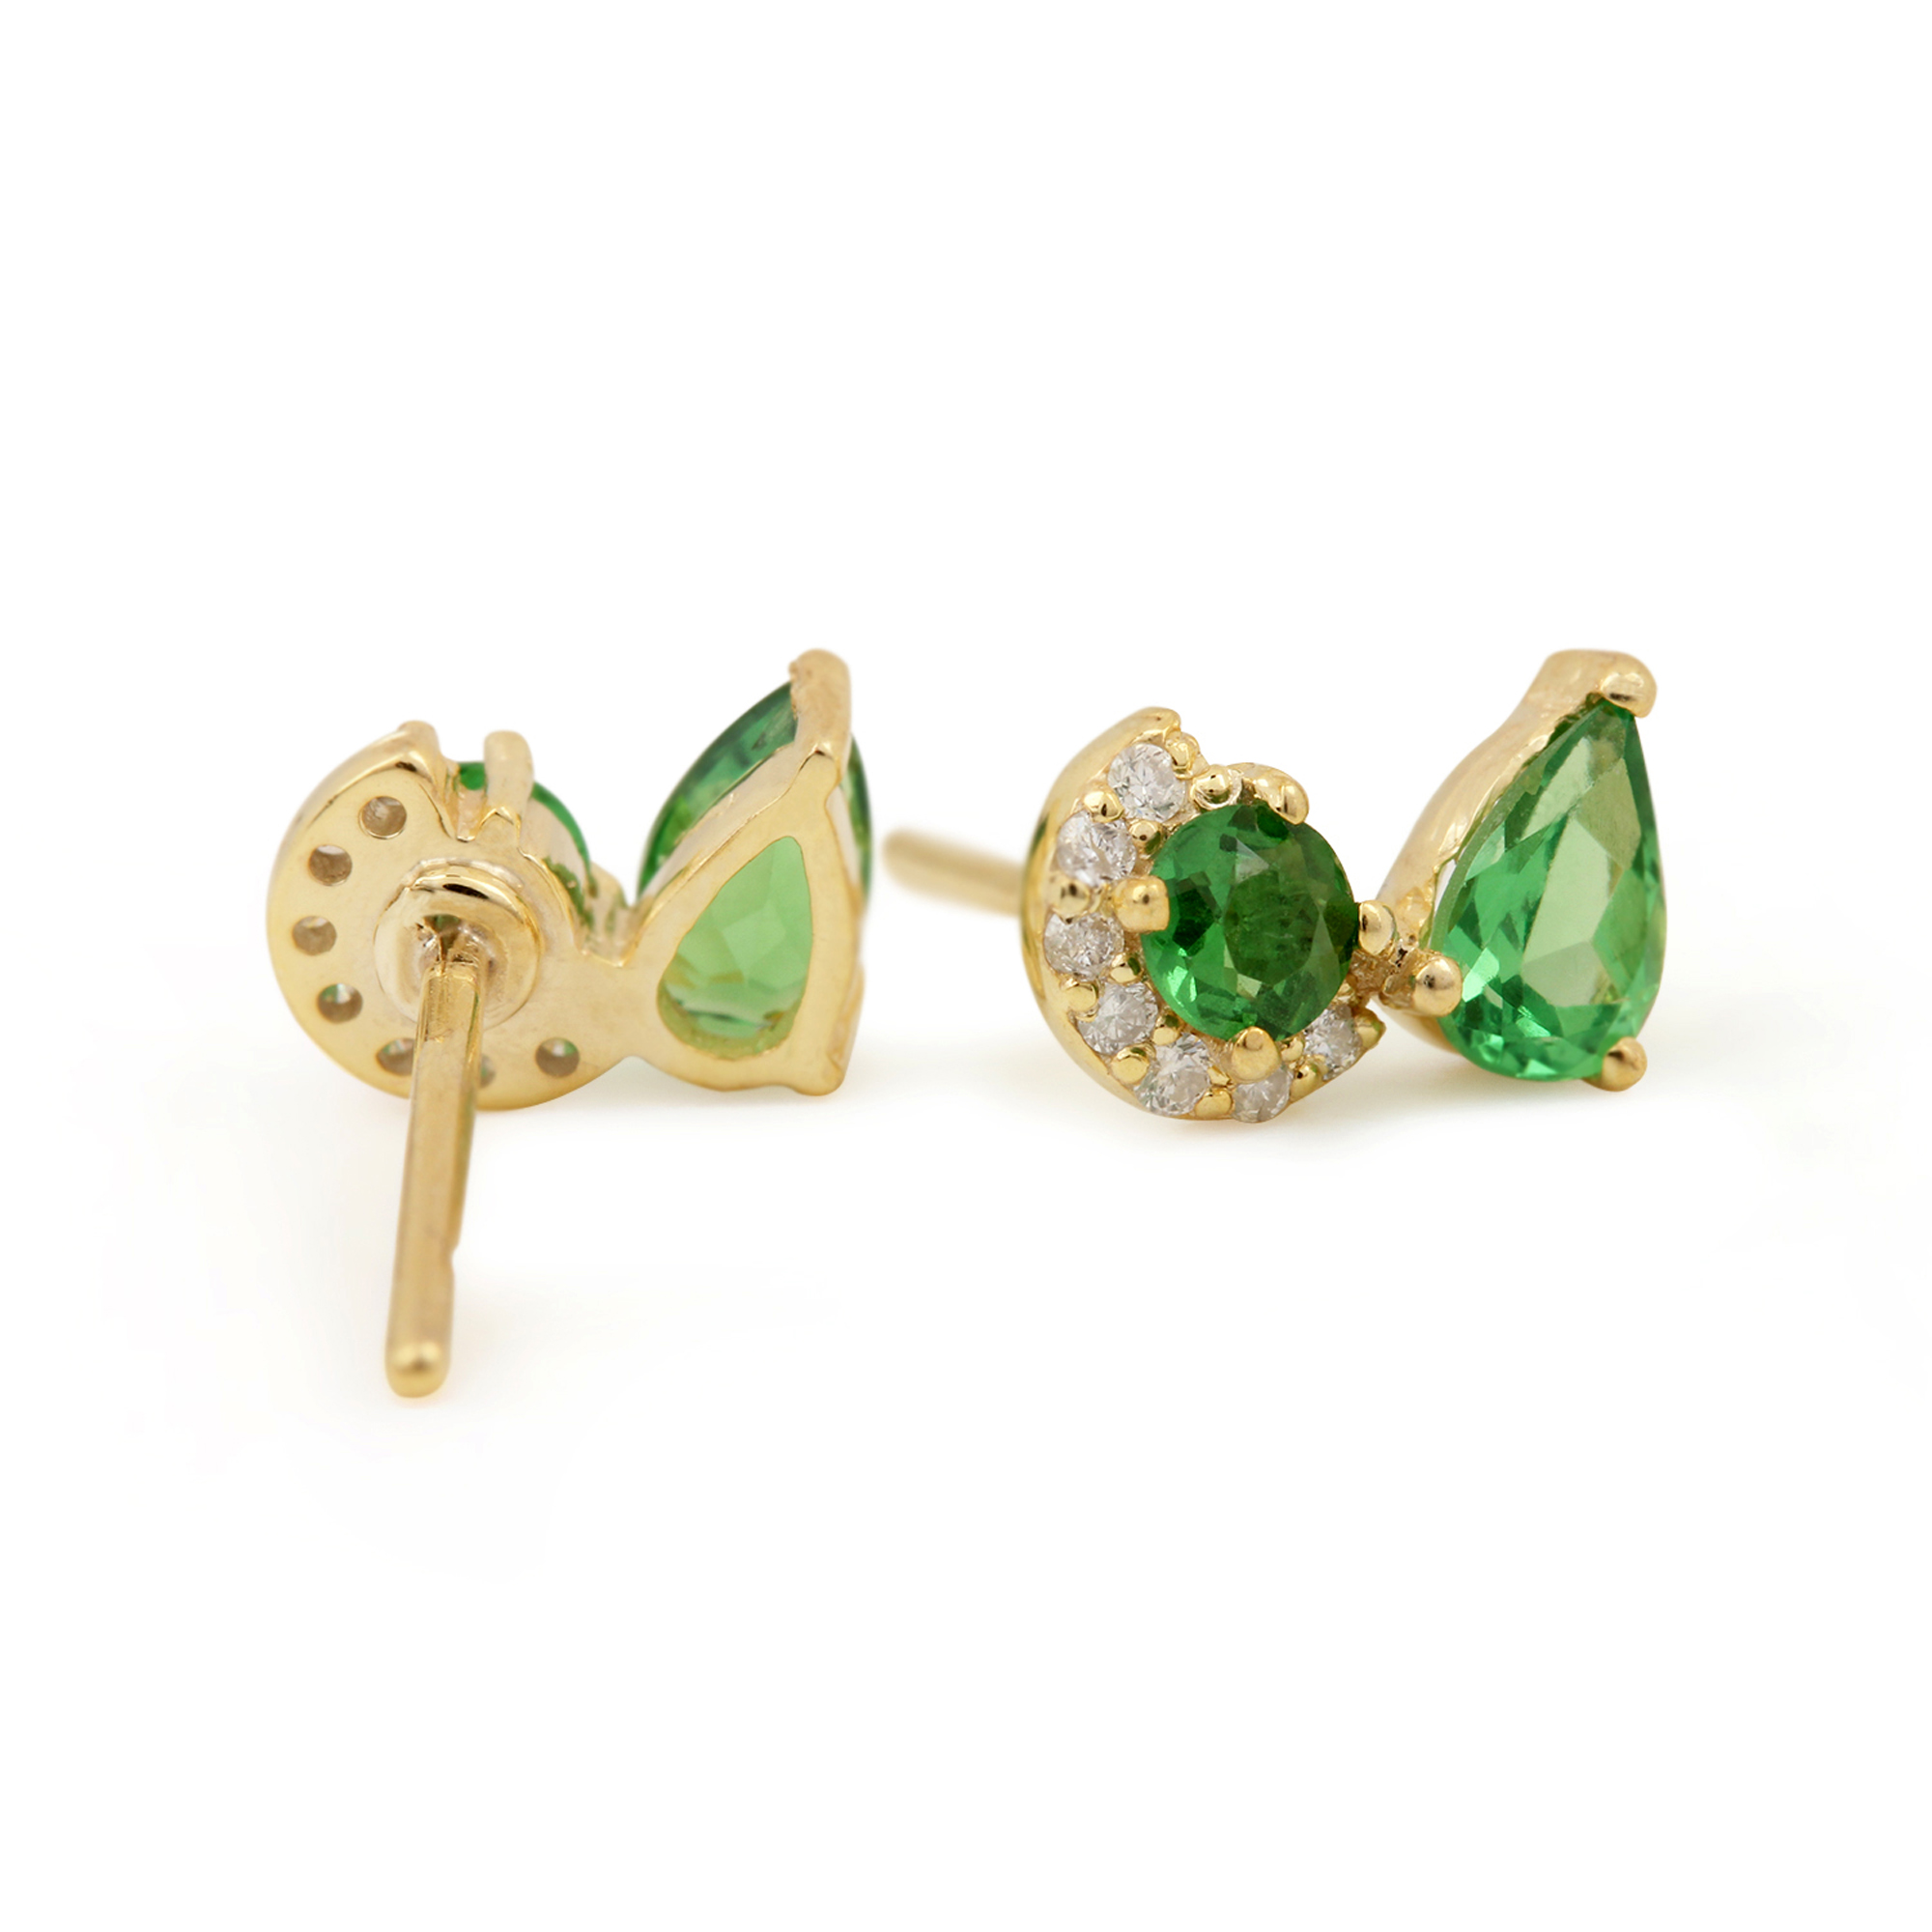 Solid 14k Gold Solitaire Stud Earrings Adorned With Diamond & Natural Tsavorite